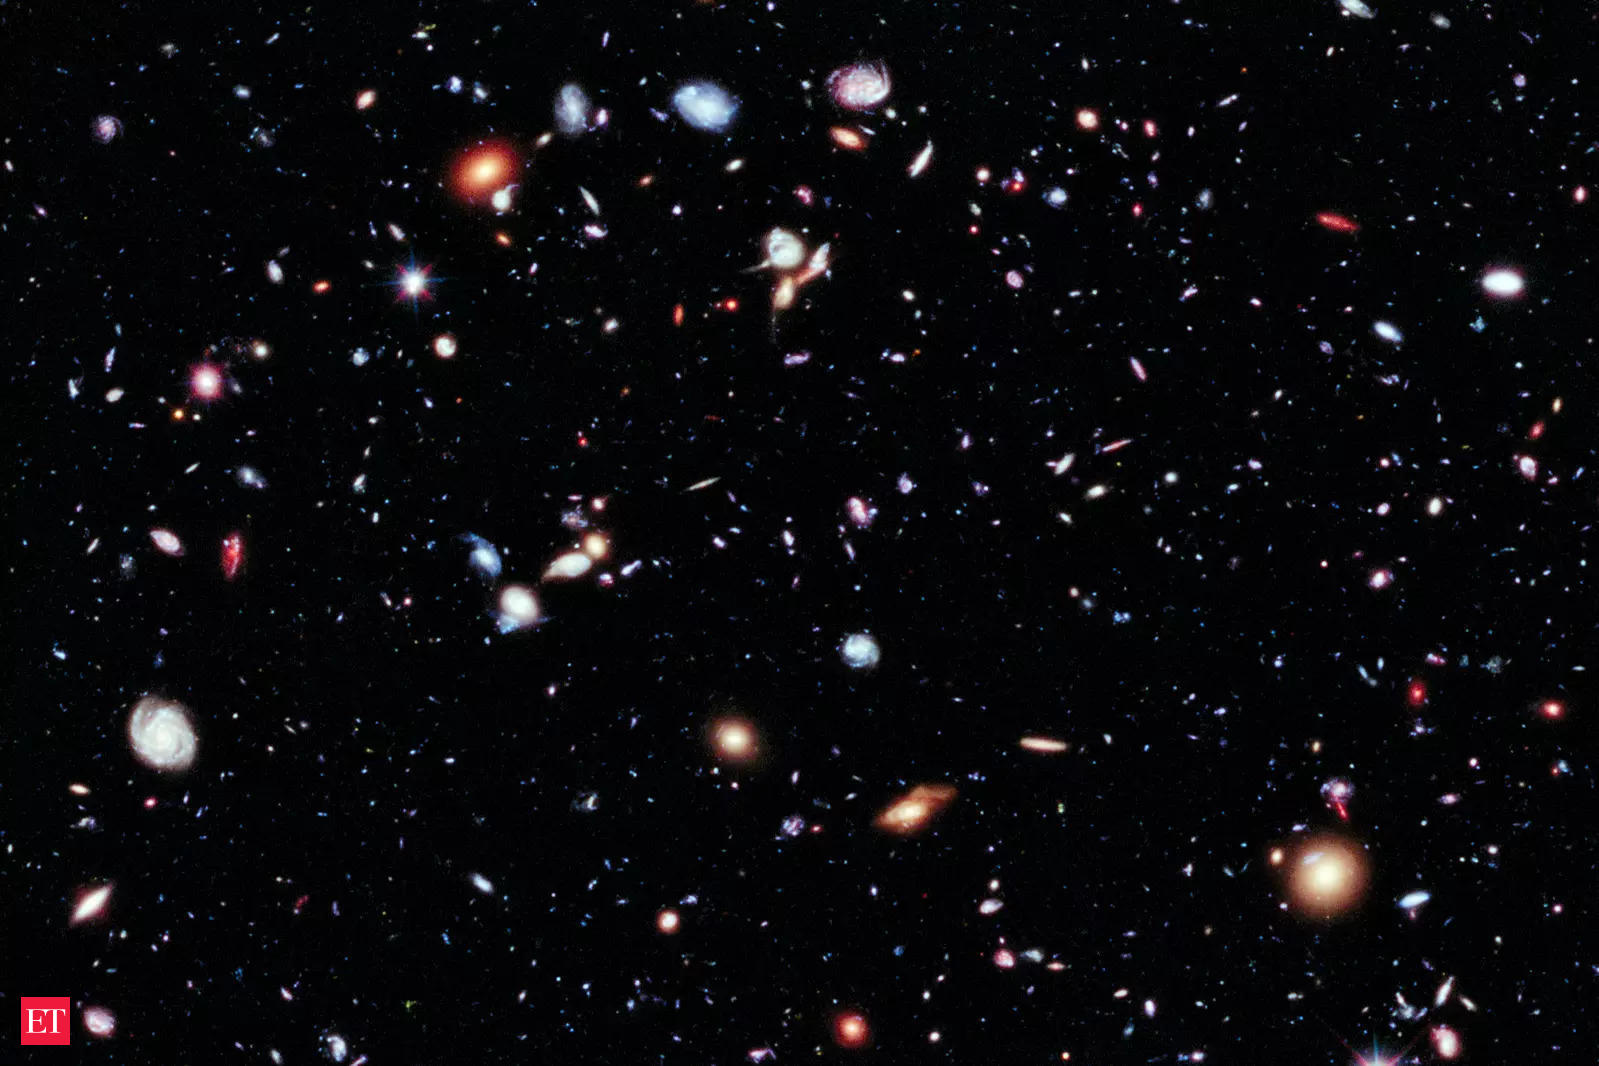 James Webb Telescope: Here's how to far far away galaxies in universe - The Economic Times